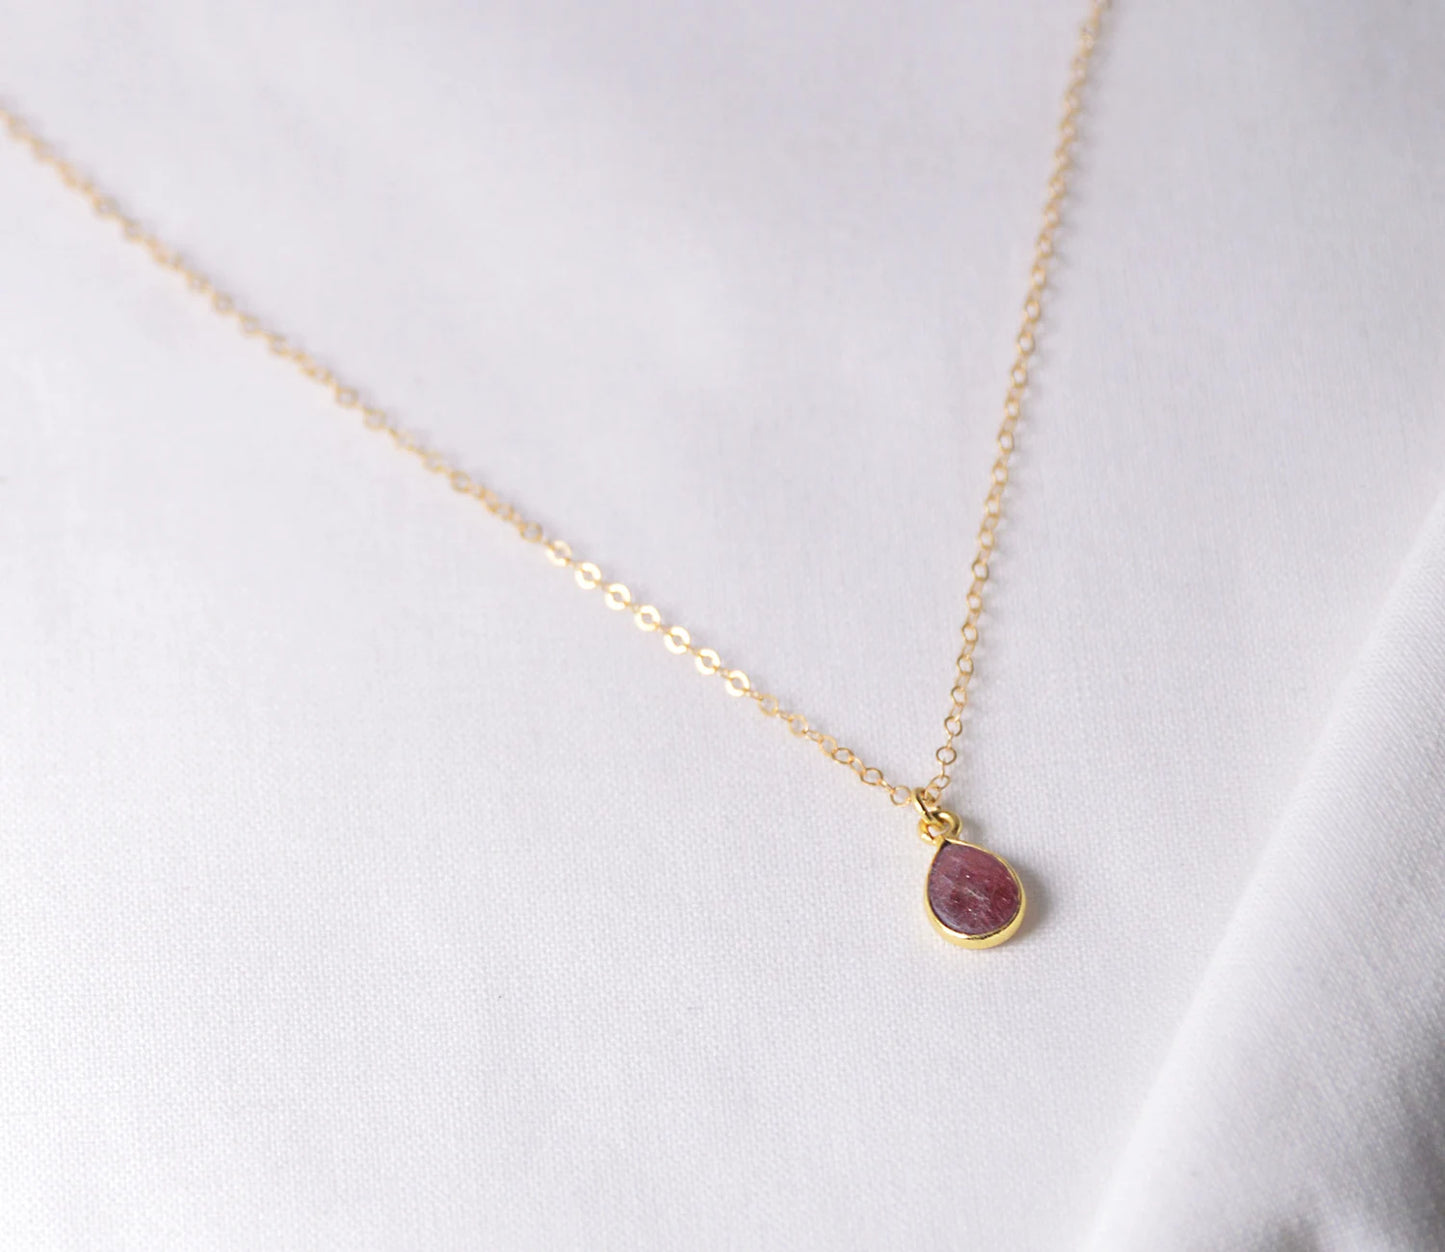 Ruby Charm Necklace Pendant | Stone of Love